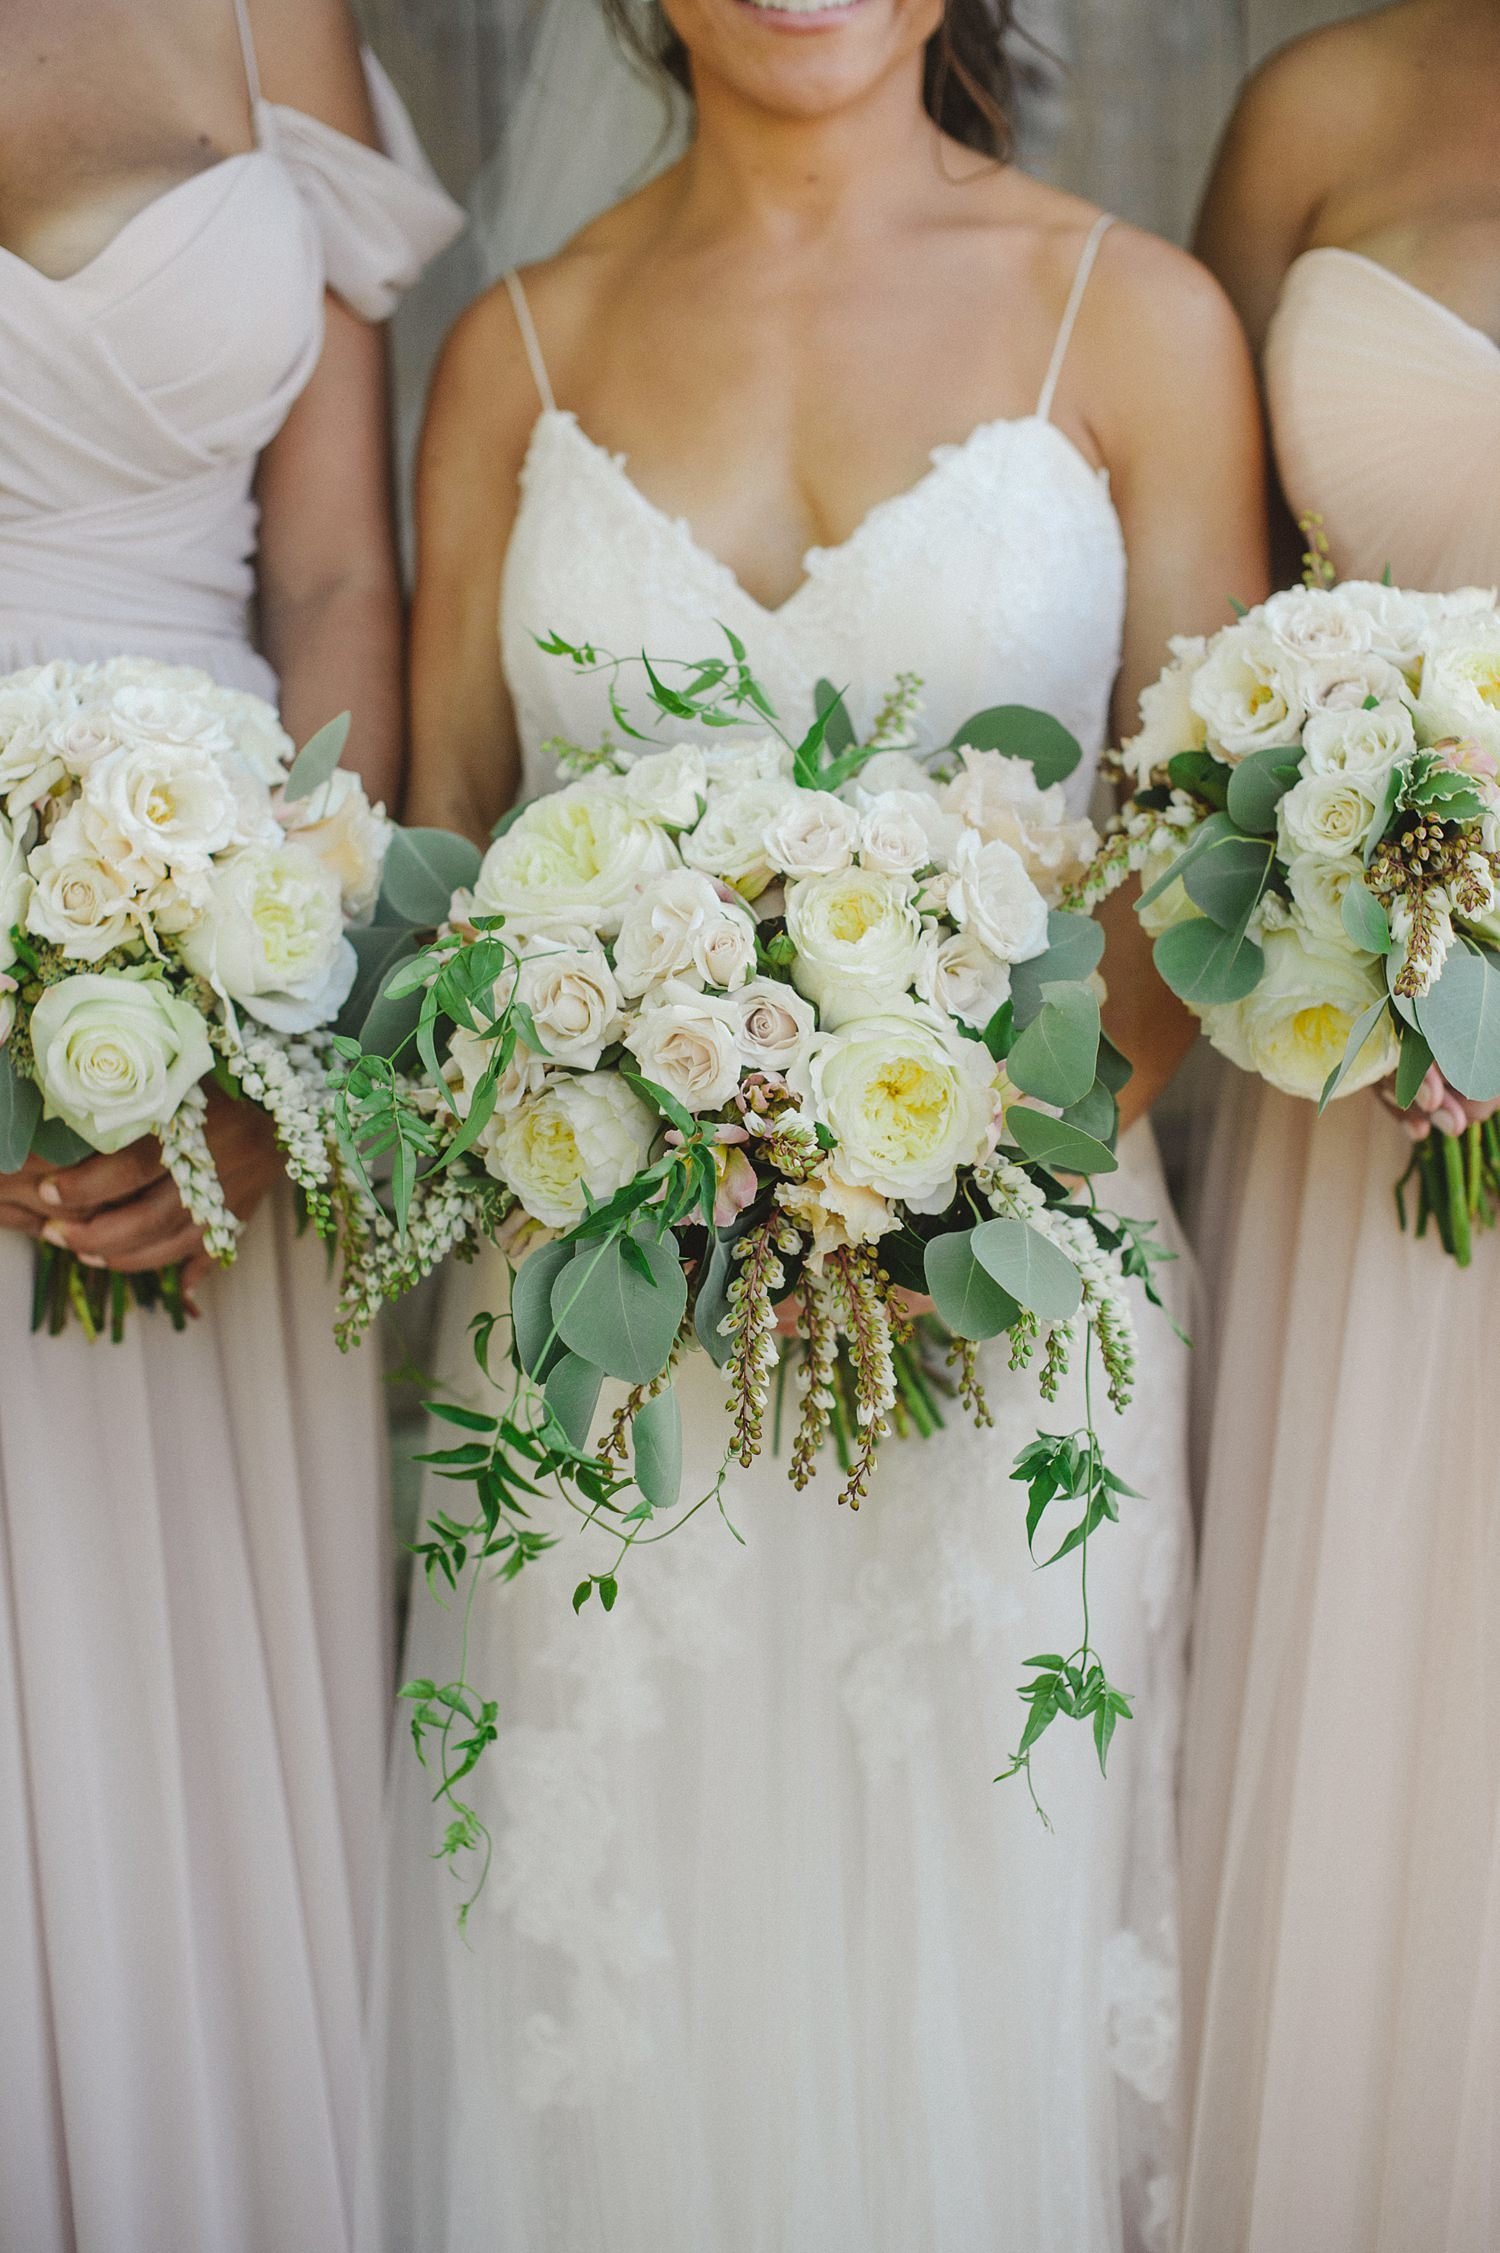 Rustic wedding bouquets in green, blush and ivory at The Webb Barn in Wethersfield, CT